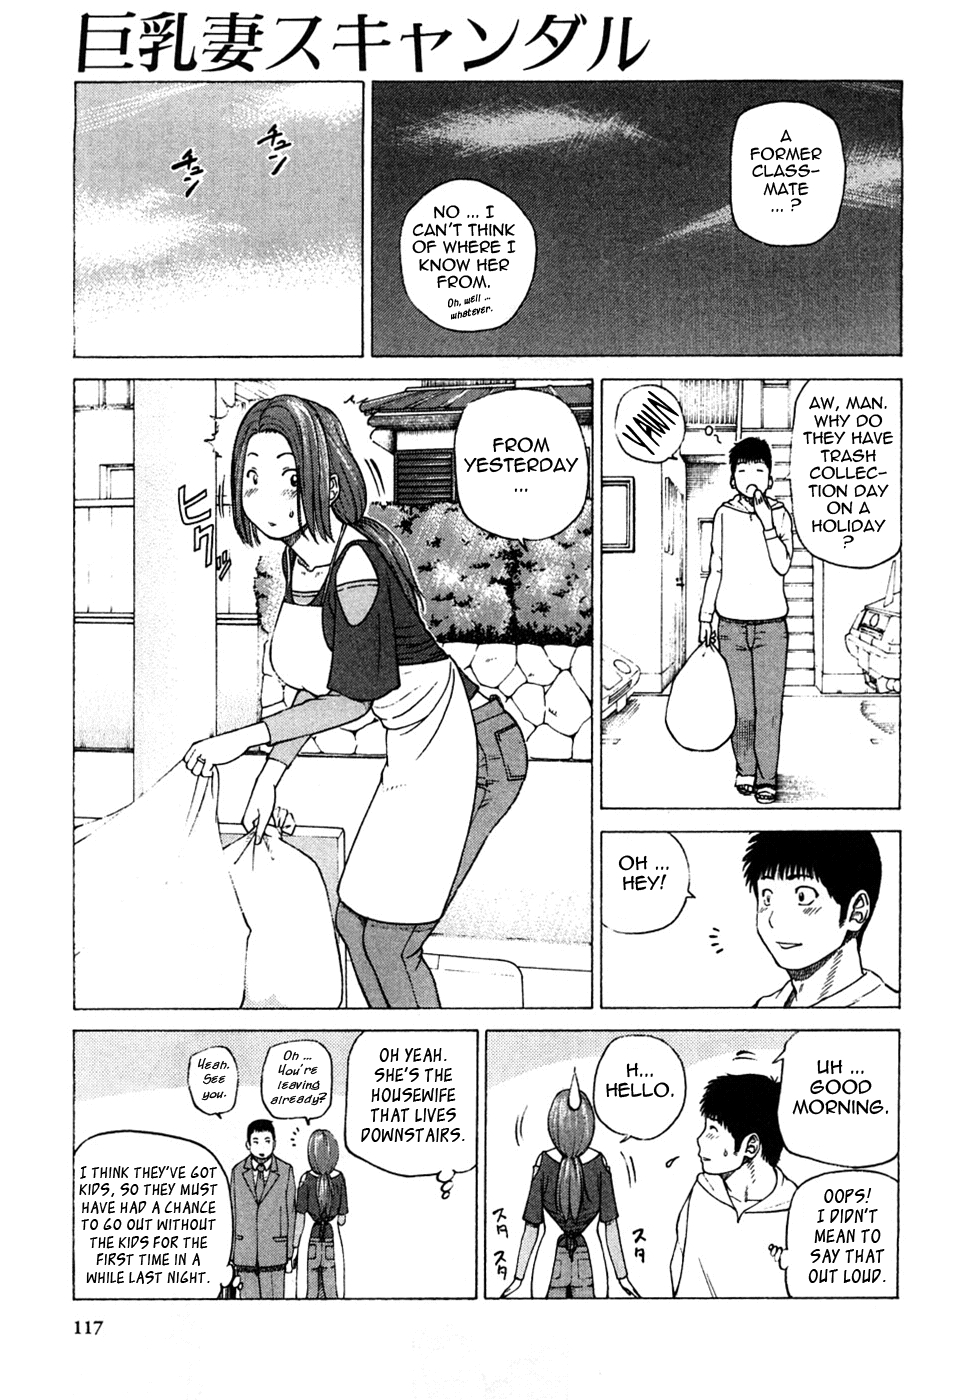 Hentai Manga Comic-29 Year Old Lusting Wife-Chapter 7-Big-Titty Married Woman Scandal-3